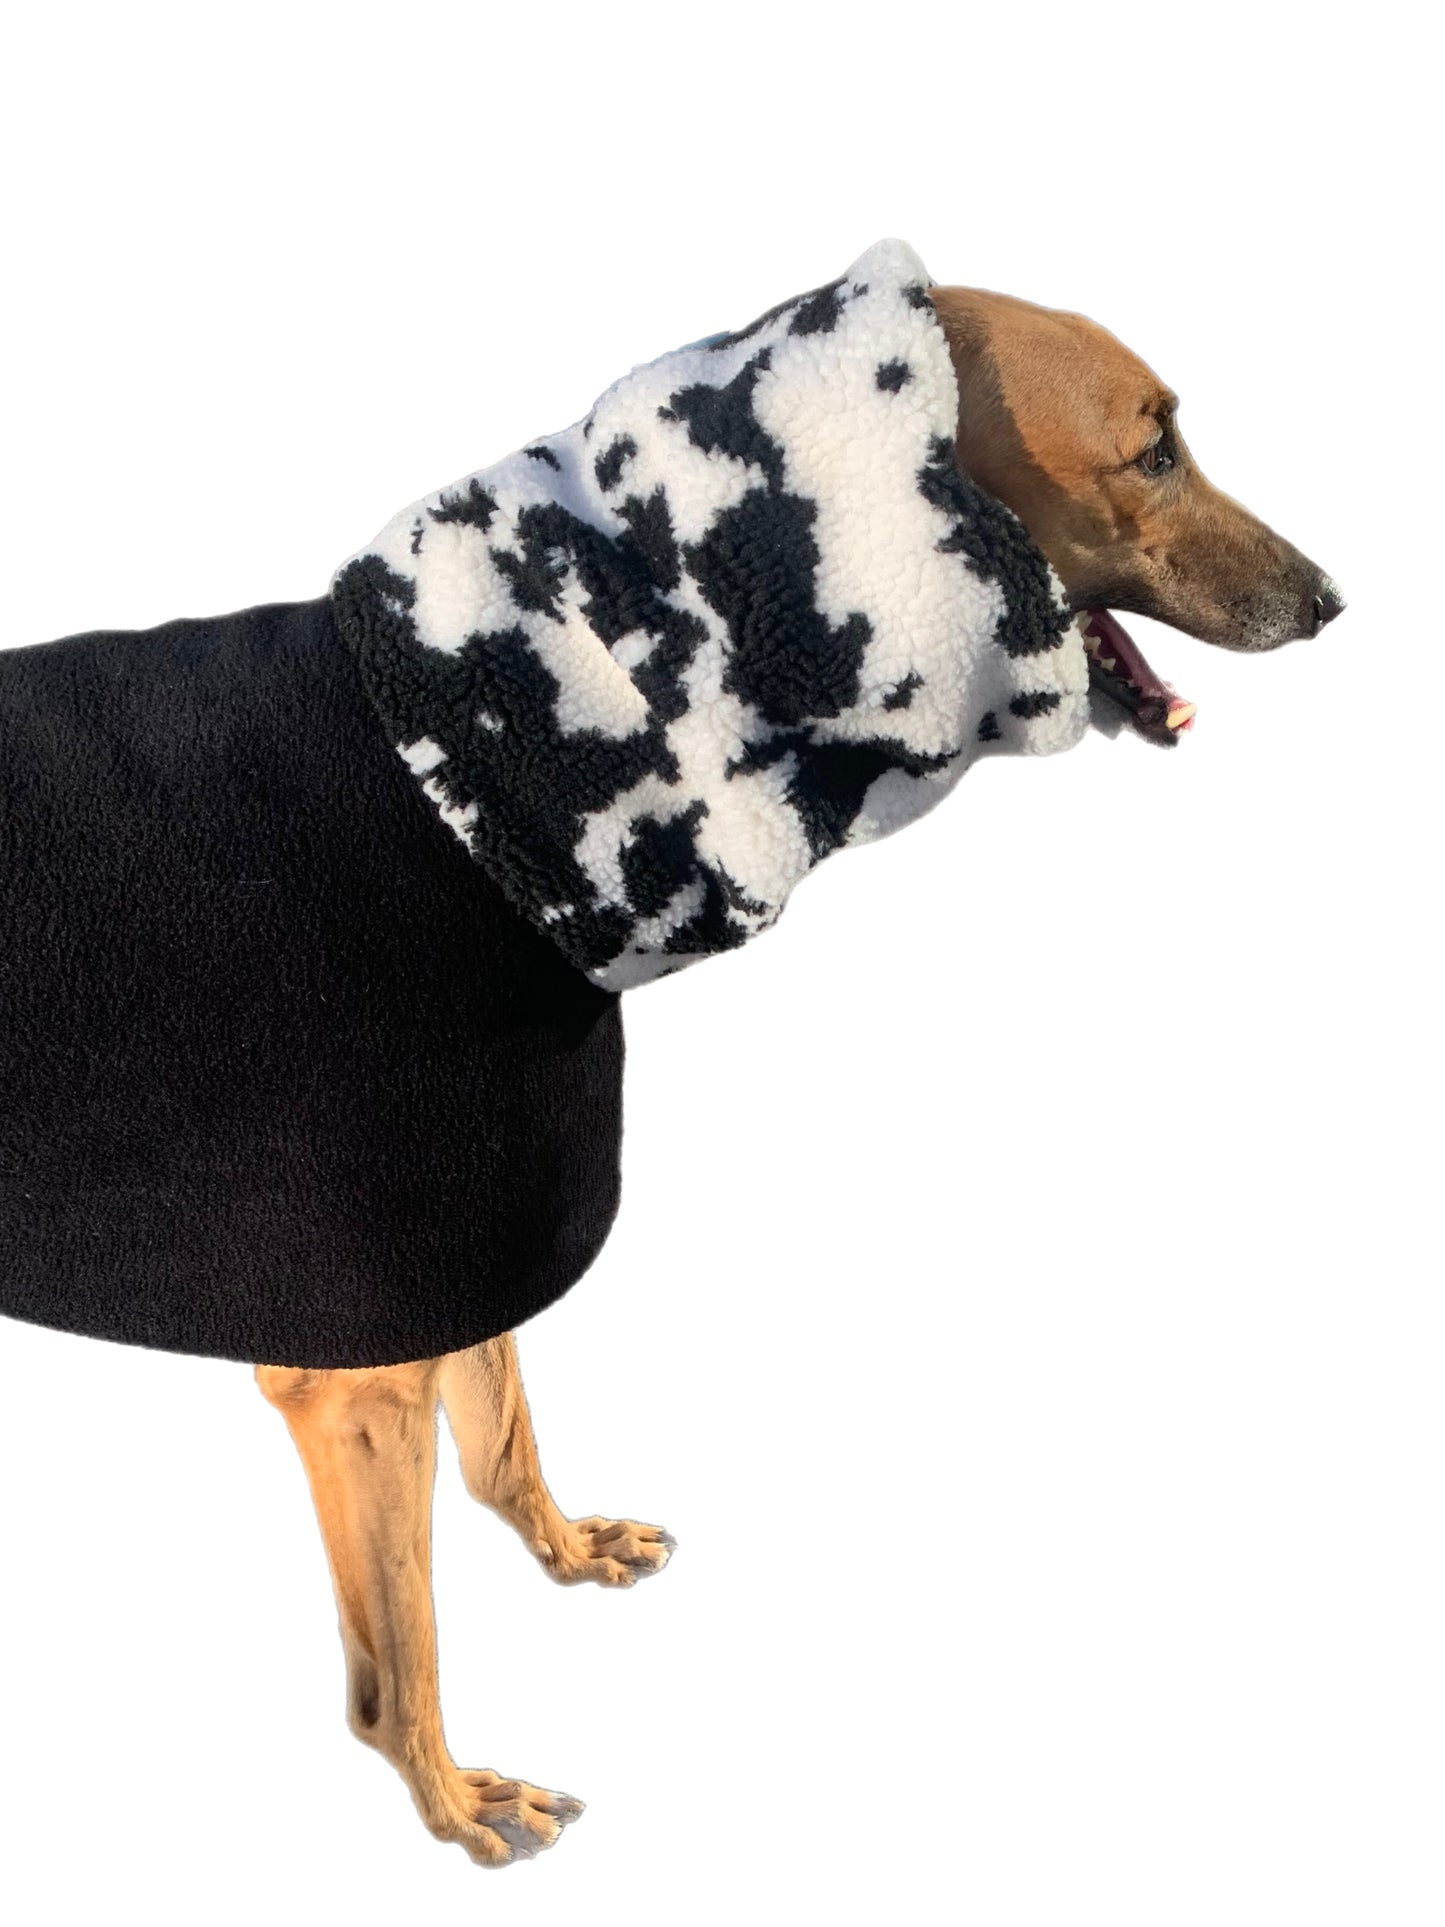 Deluxe greyhound coat rug thick polar fleece washable extra wide Sherpa neck hoodie